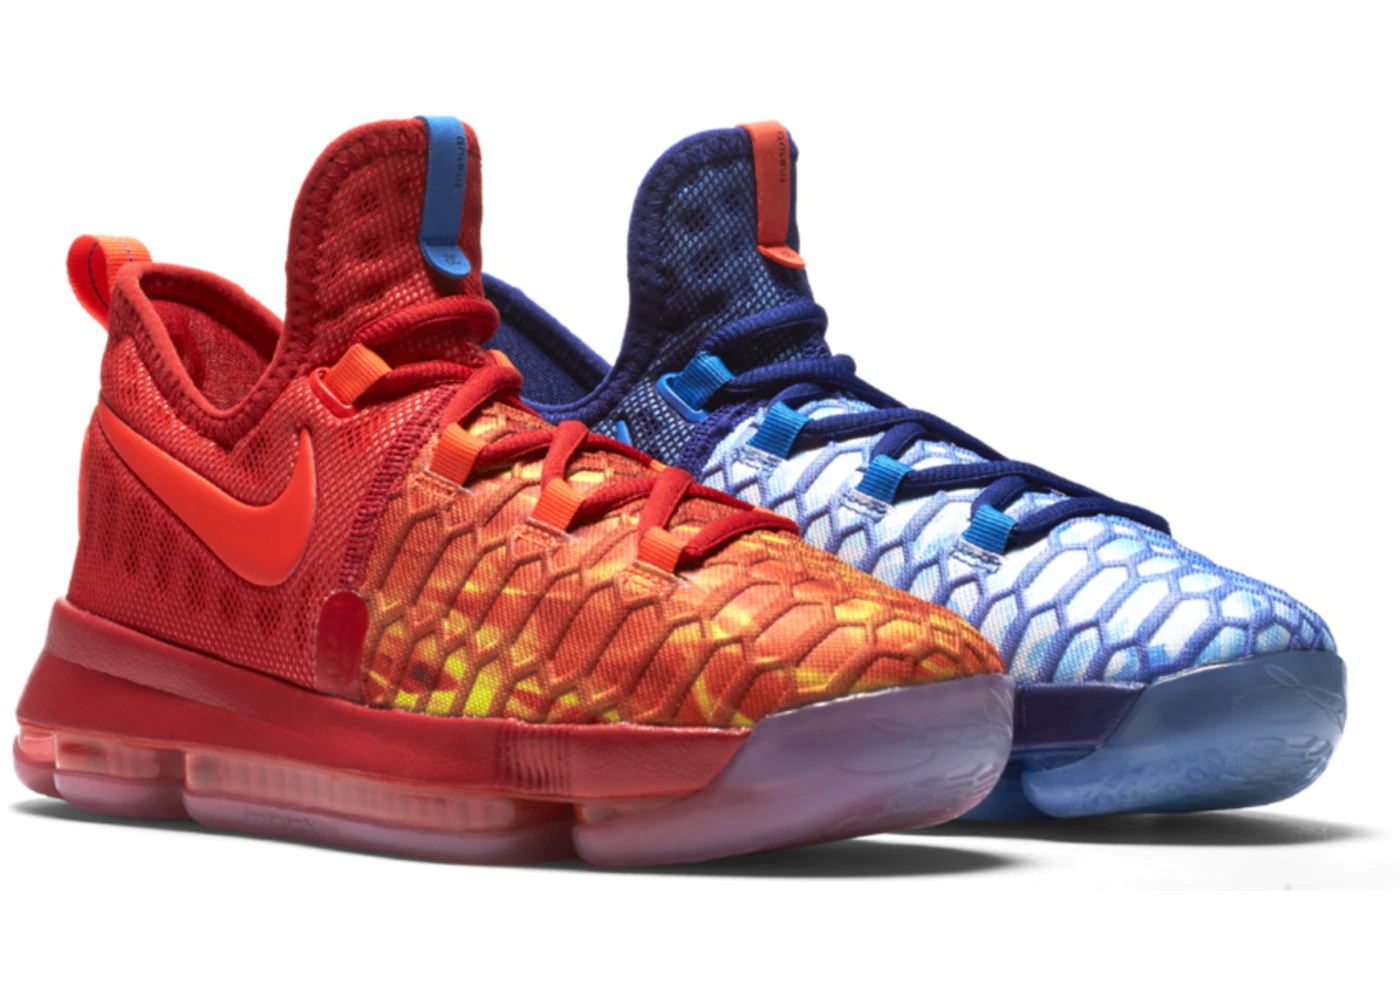 Kd Shoes Fire And Ice - KibrisPDR